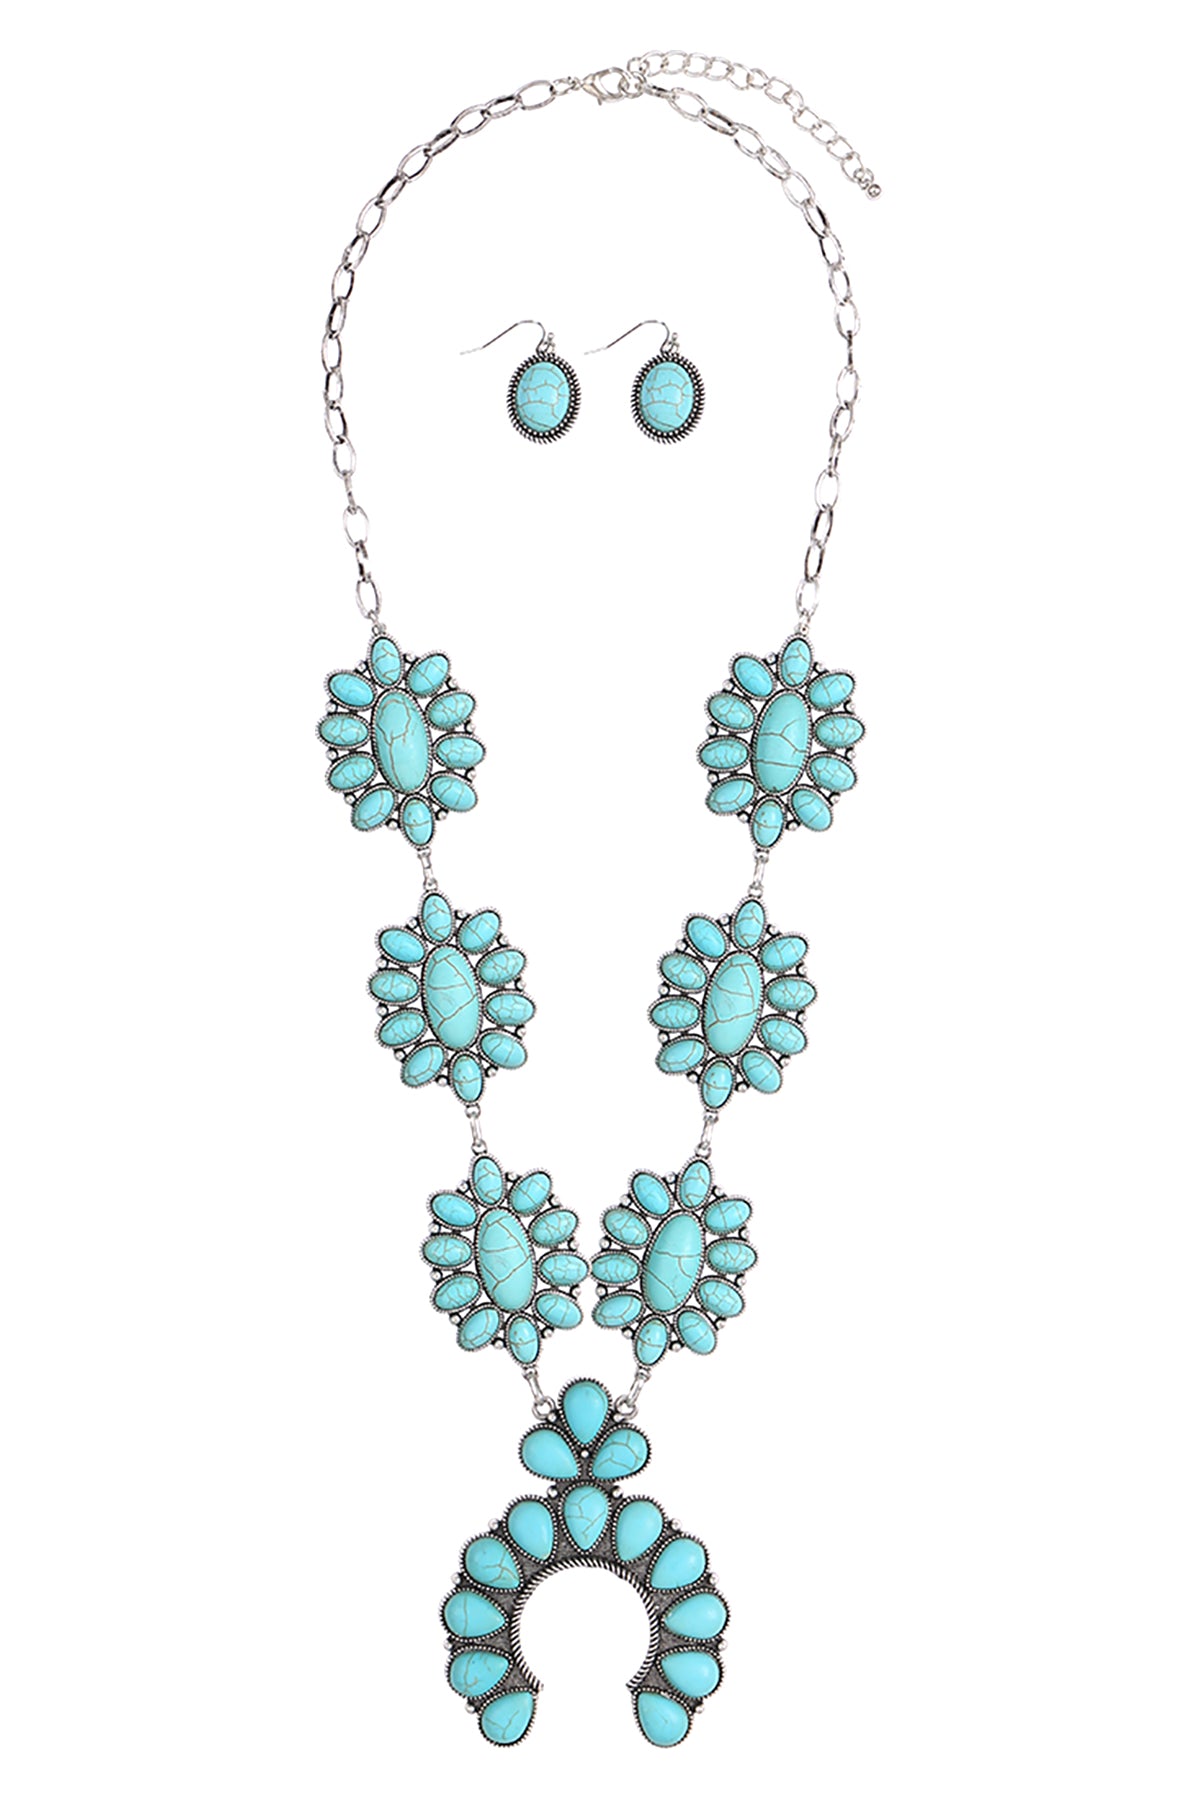 FLOWER NATURAL STONE WESTERN CONCHO STATEMENT NECKLACE AND EARRING SET